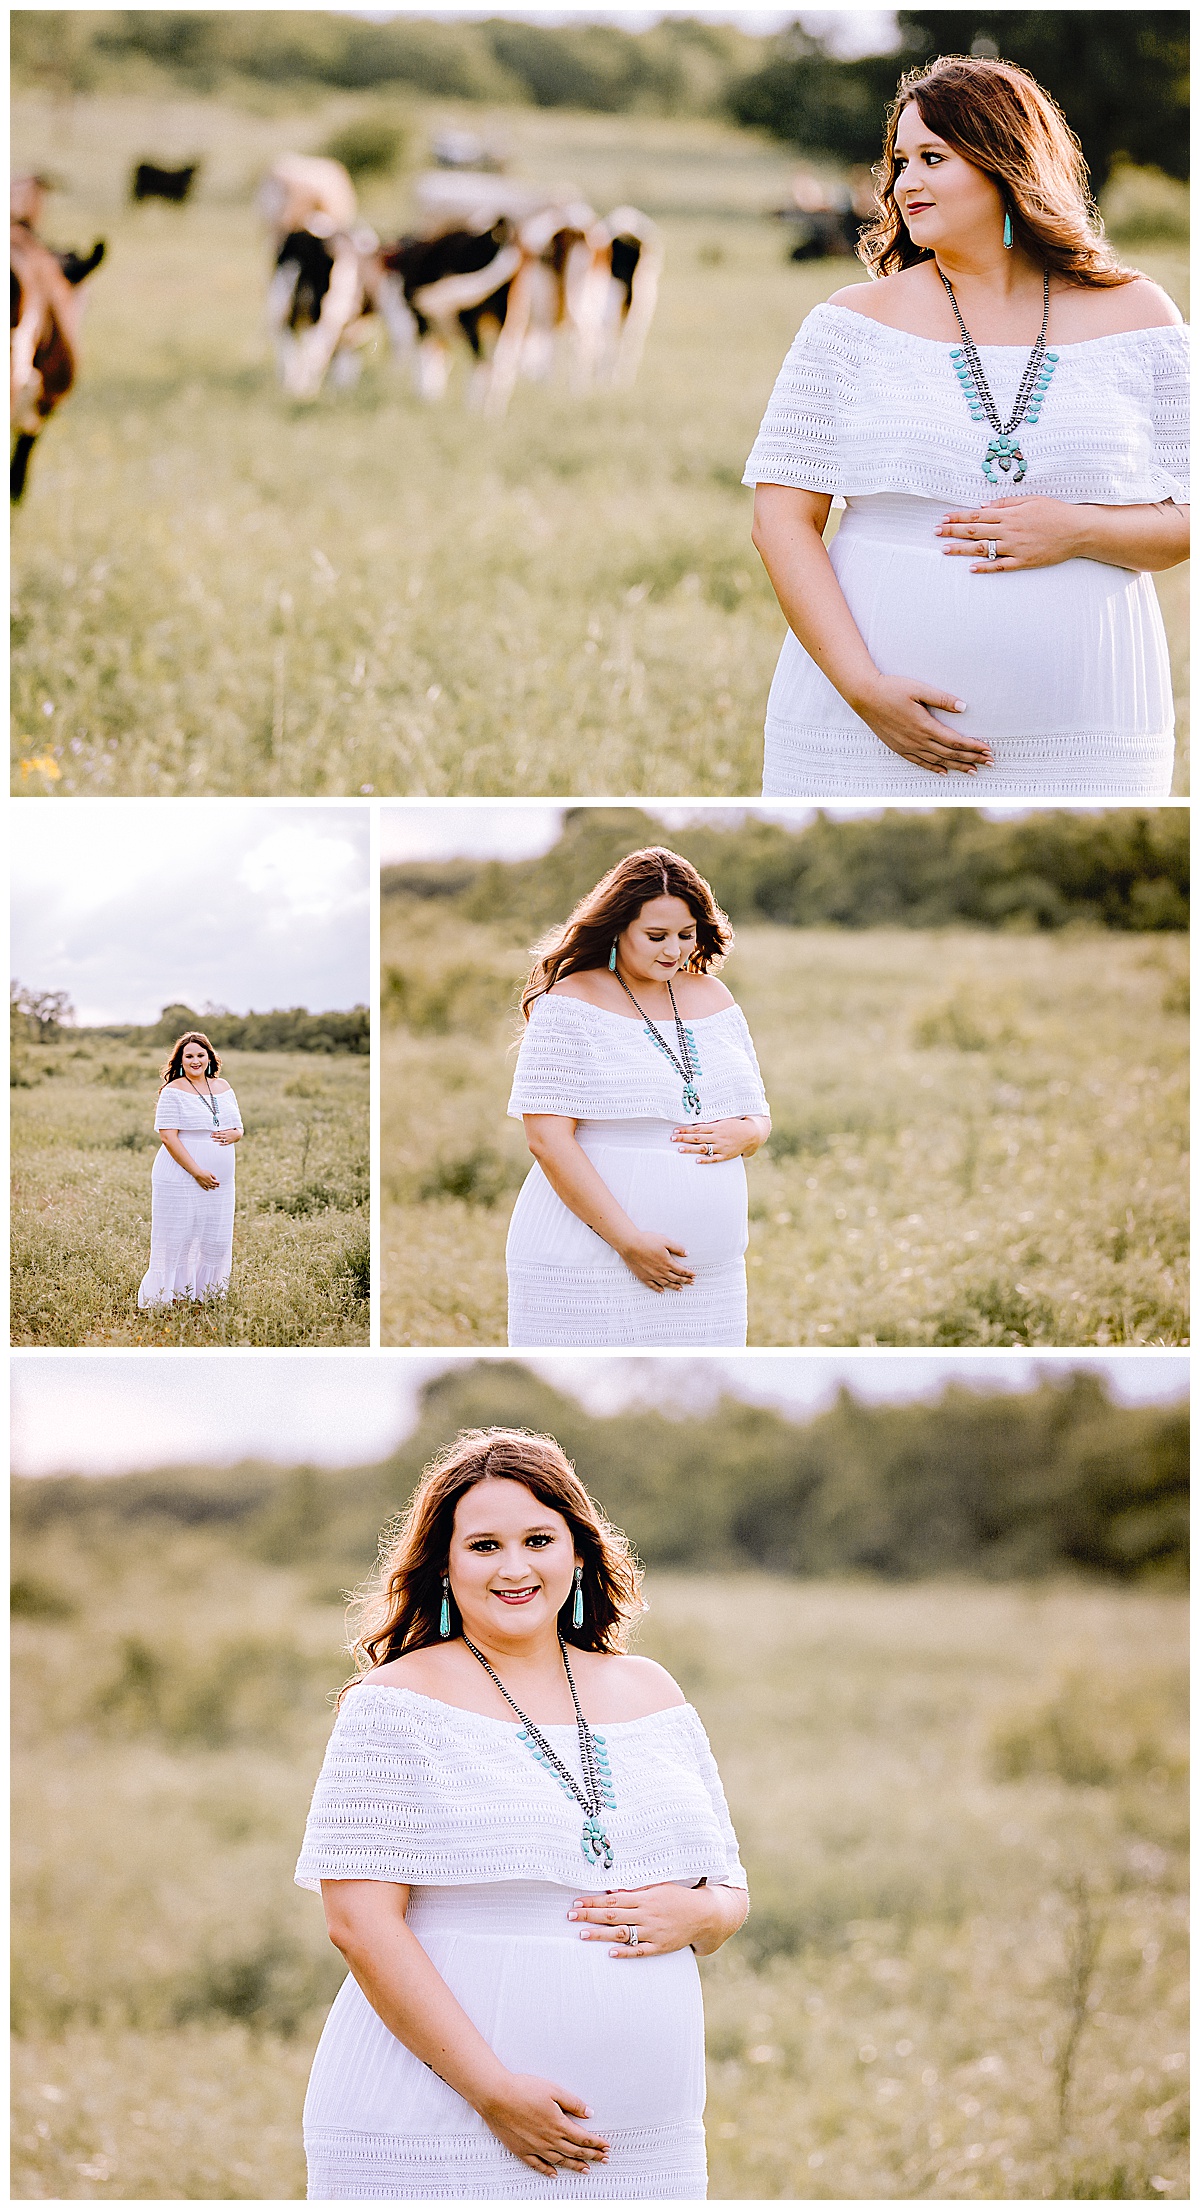 Rustic-Maternity-Session-Texas-Sunset-Carly-Barton-Photography_0066.jpg